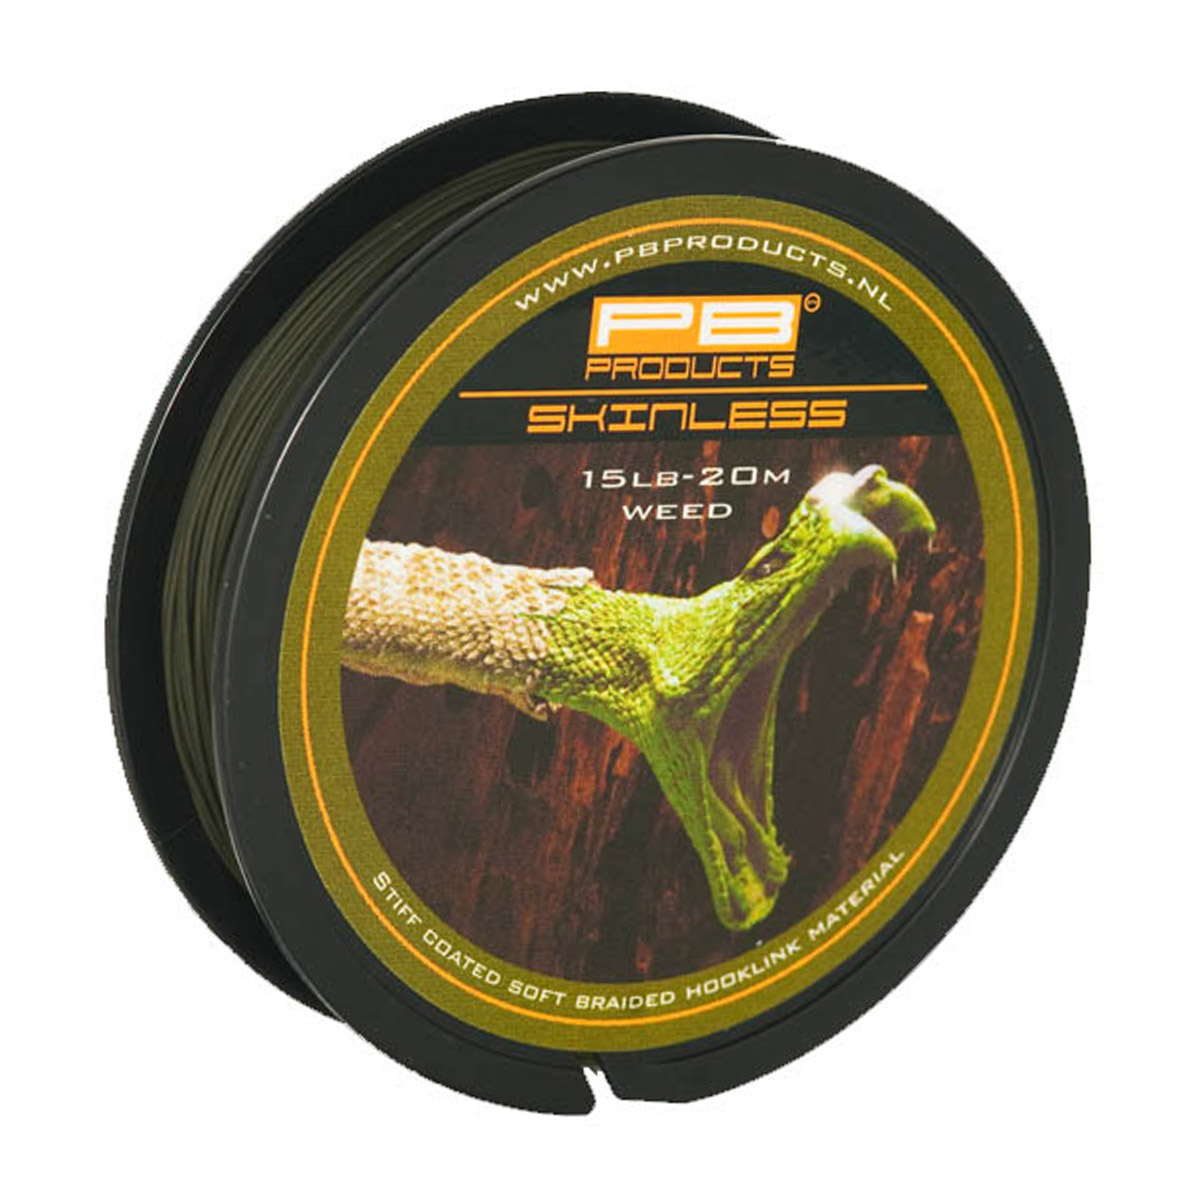 PB Products Skinless Weed 20 M